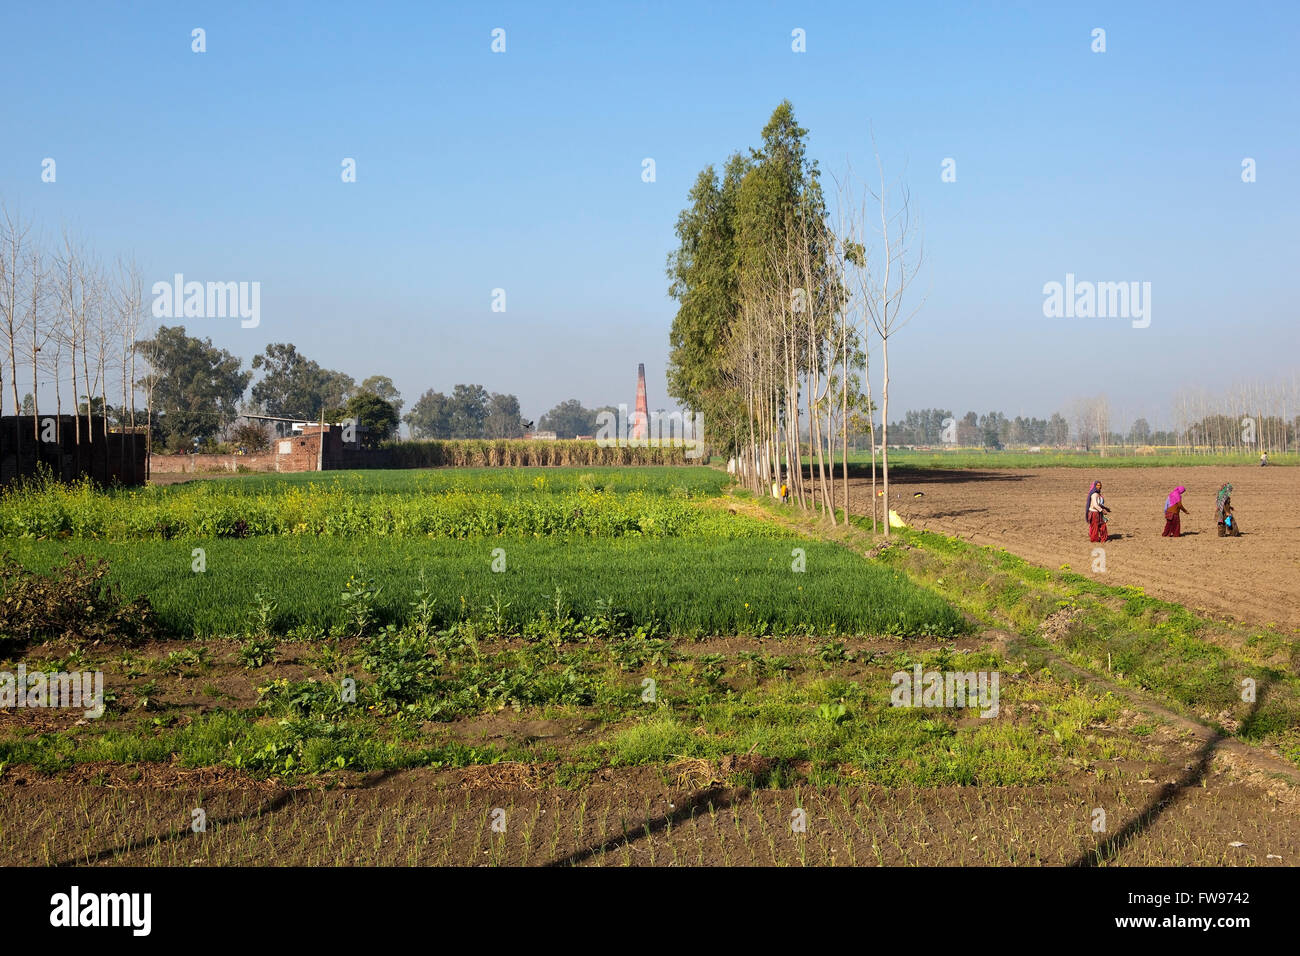 A Punjabi agricultural landscape with traditionally dressed women working in the fields sowing seeds under a blue sky Stock Photo